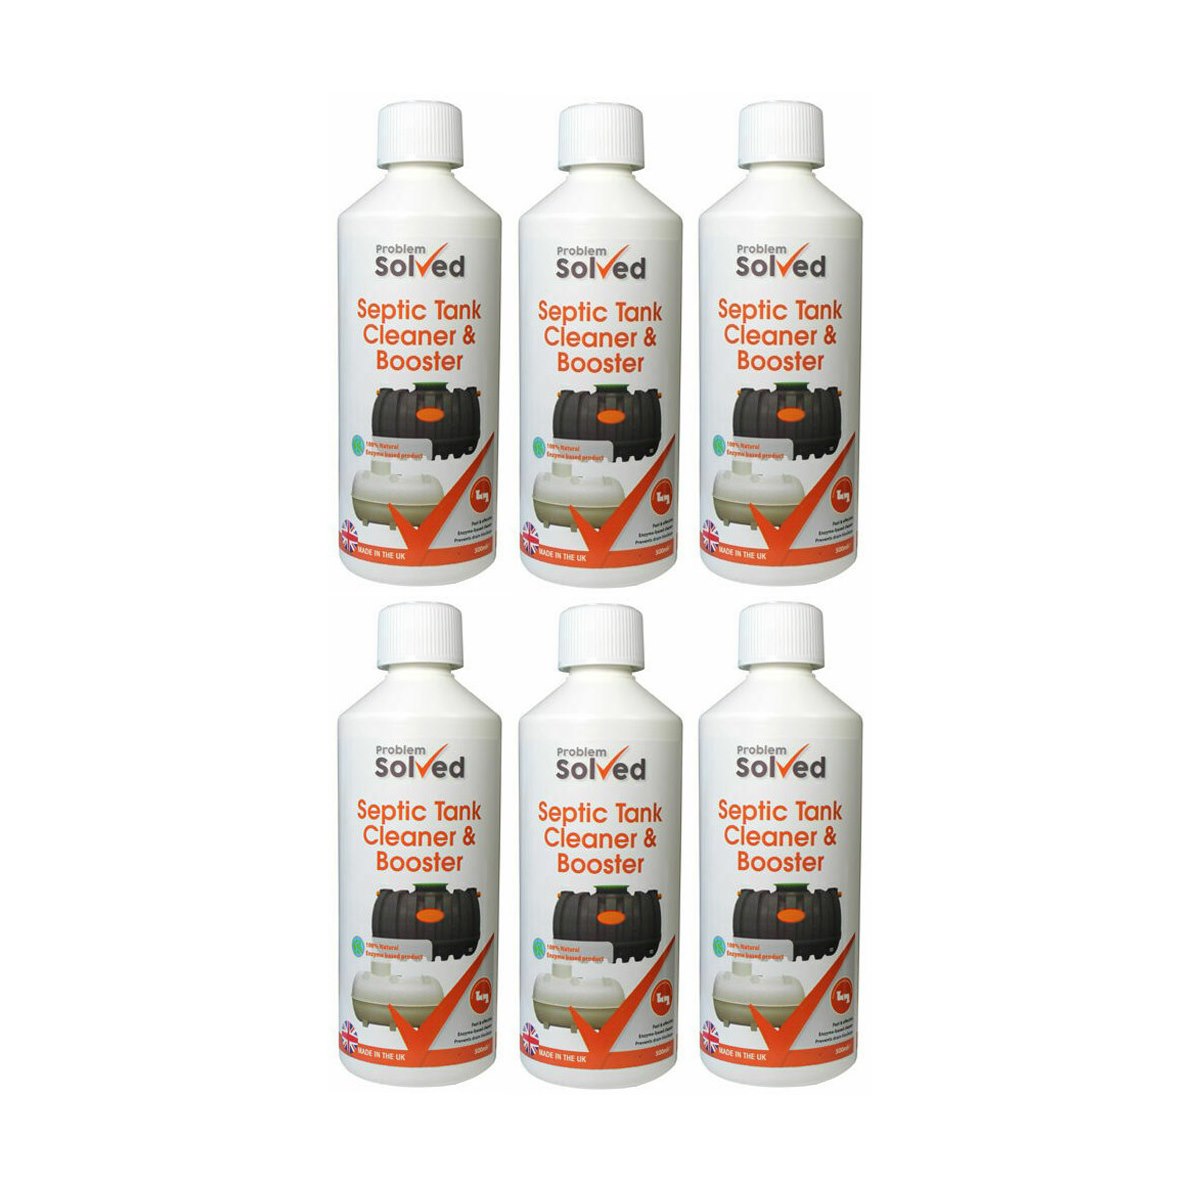 Case of 6 x Problem Solved Septic Tank Cleaner and Booster 500ml